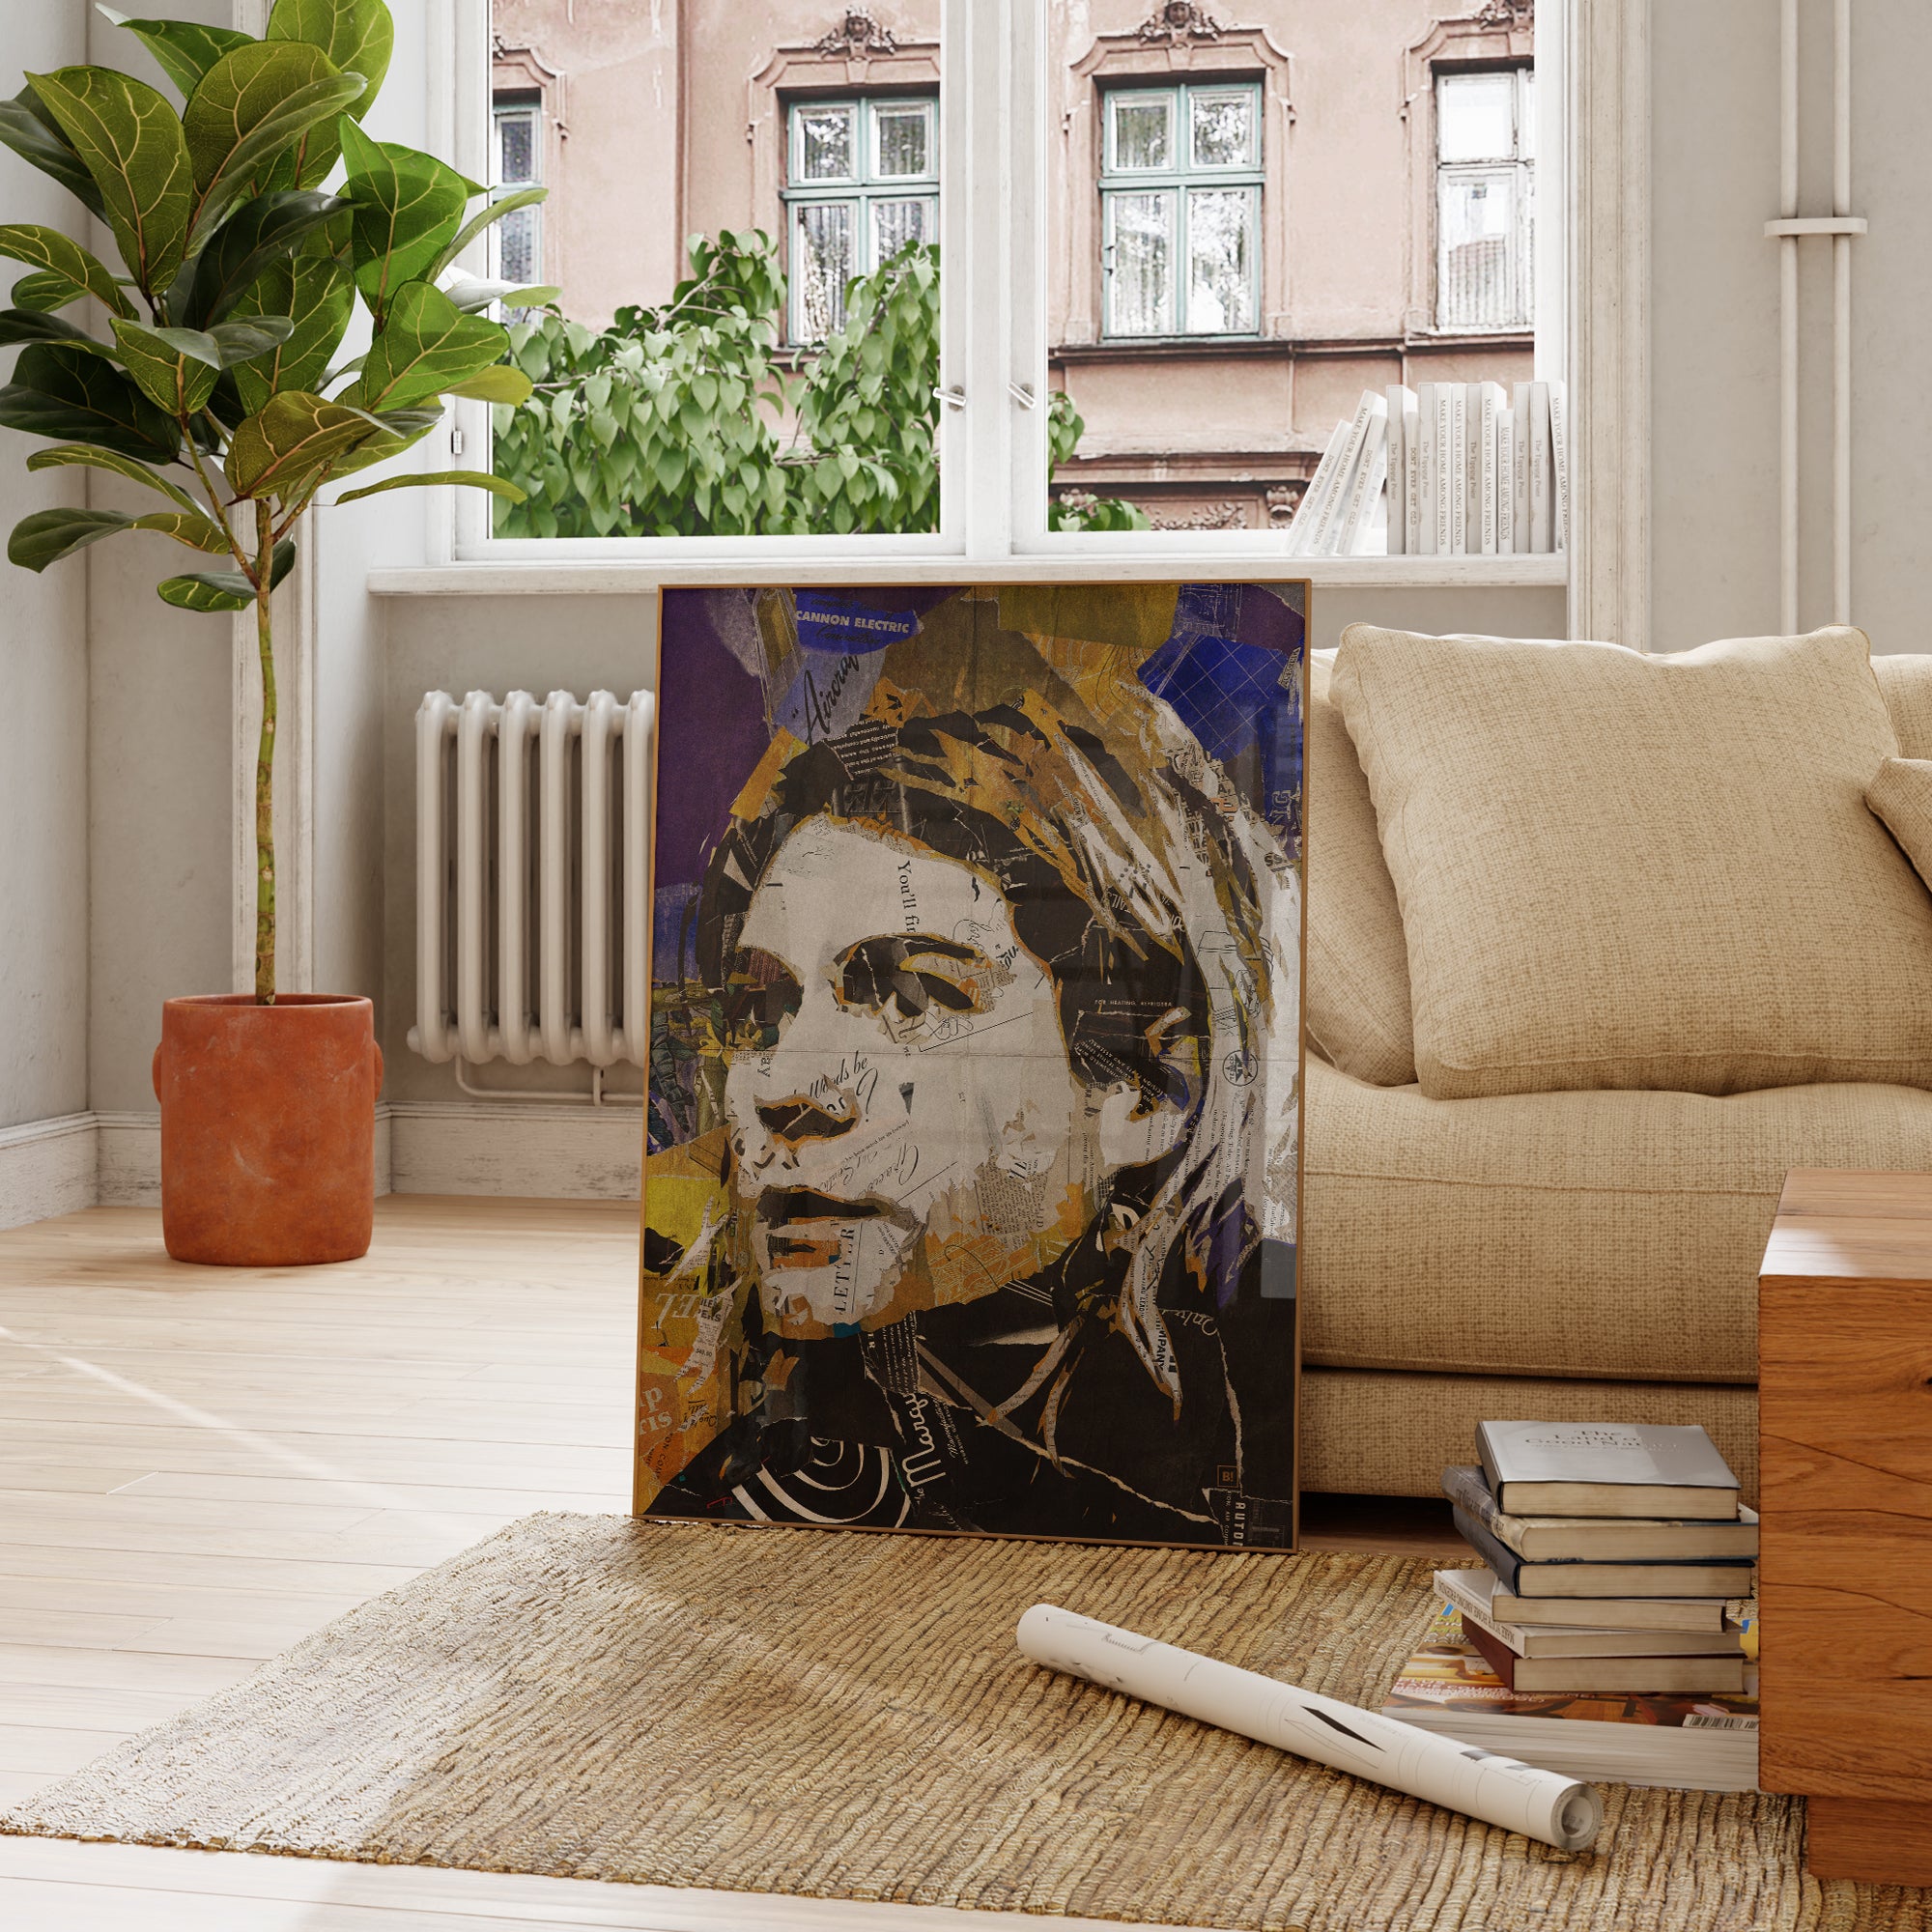 Be inspired by our iconic collage portrait art print of Kurt Cobain. This artwork was printed using the giclée process on archival acid-free paper and is presented in a French living room, capturing its timeless beauty in every detail